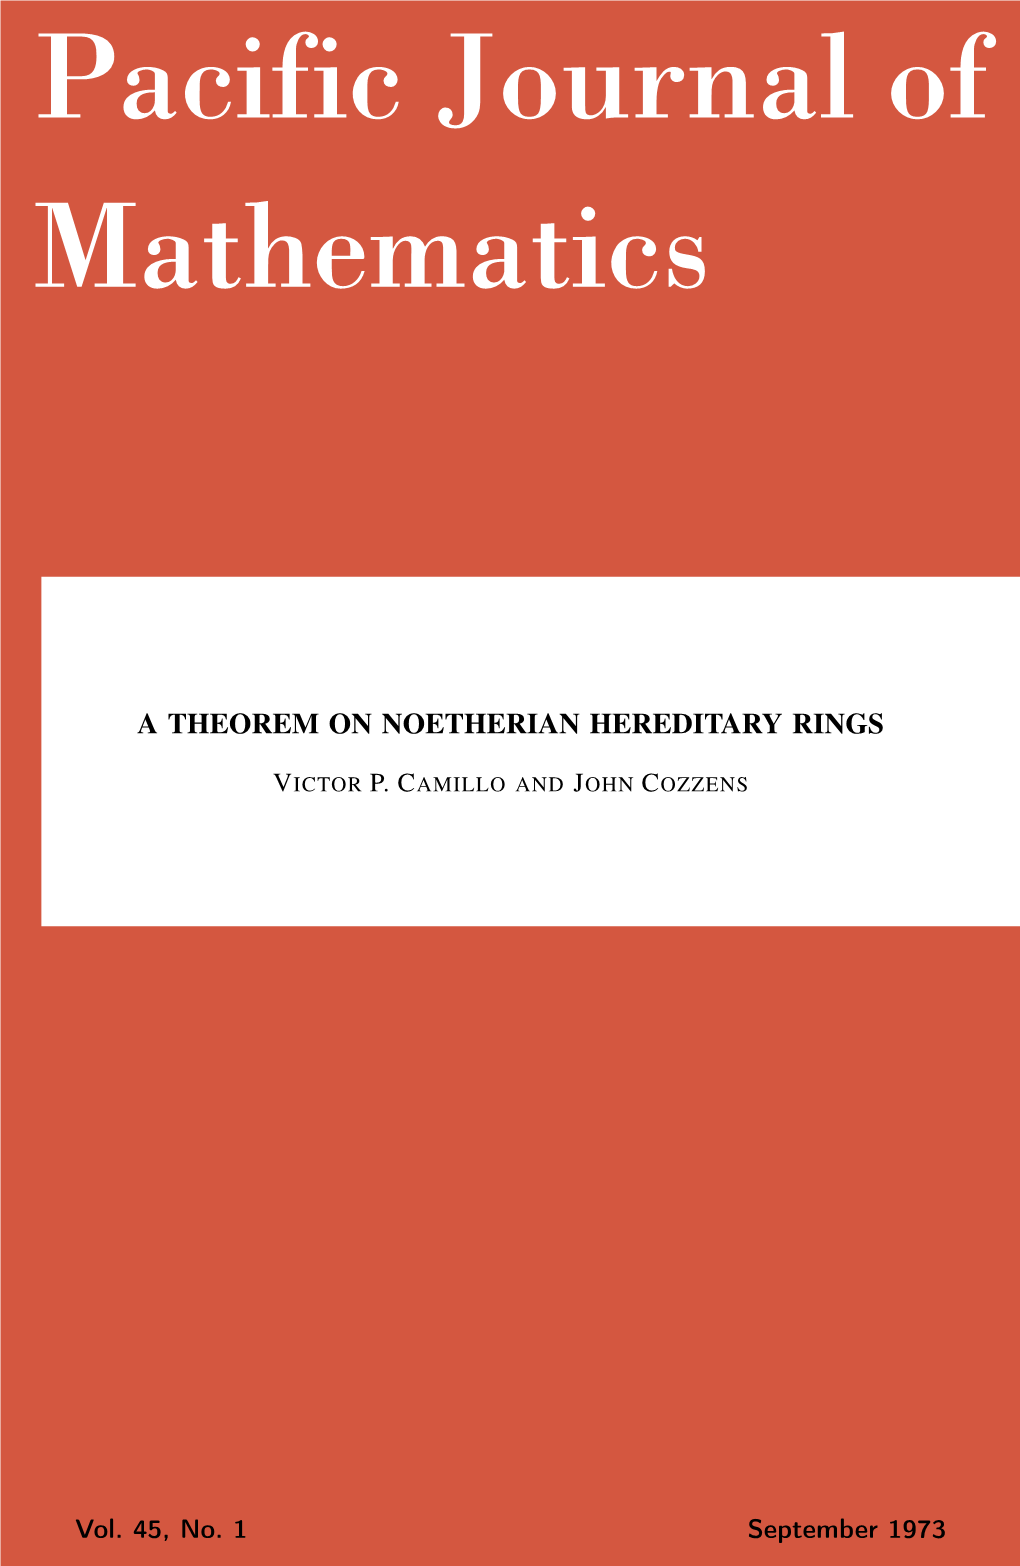 A Theorem on Noetherian Hereditary Rings